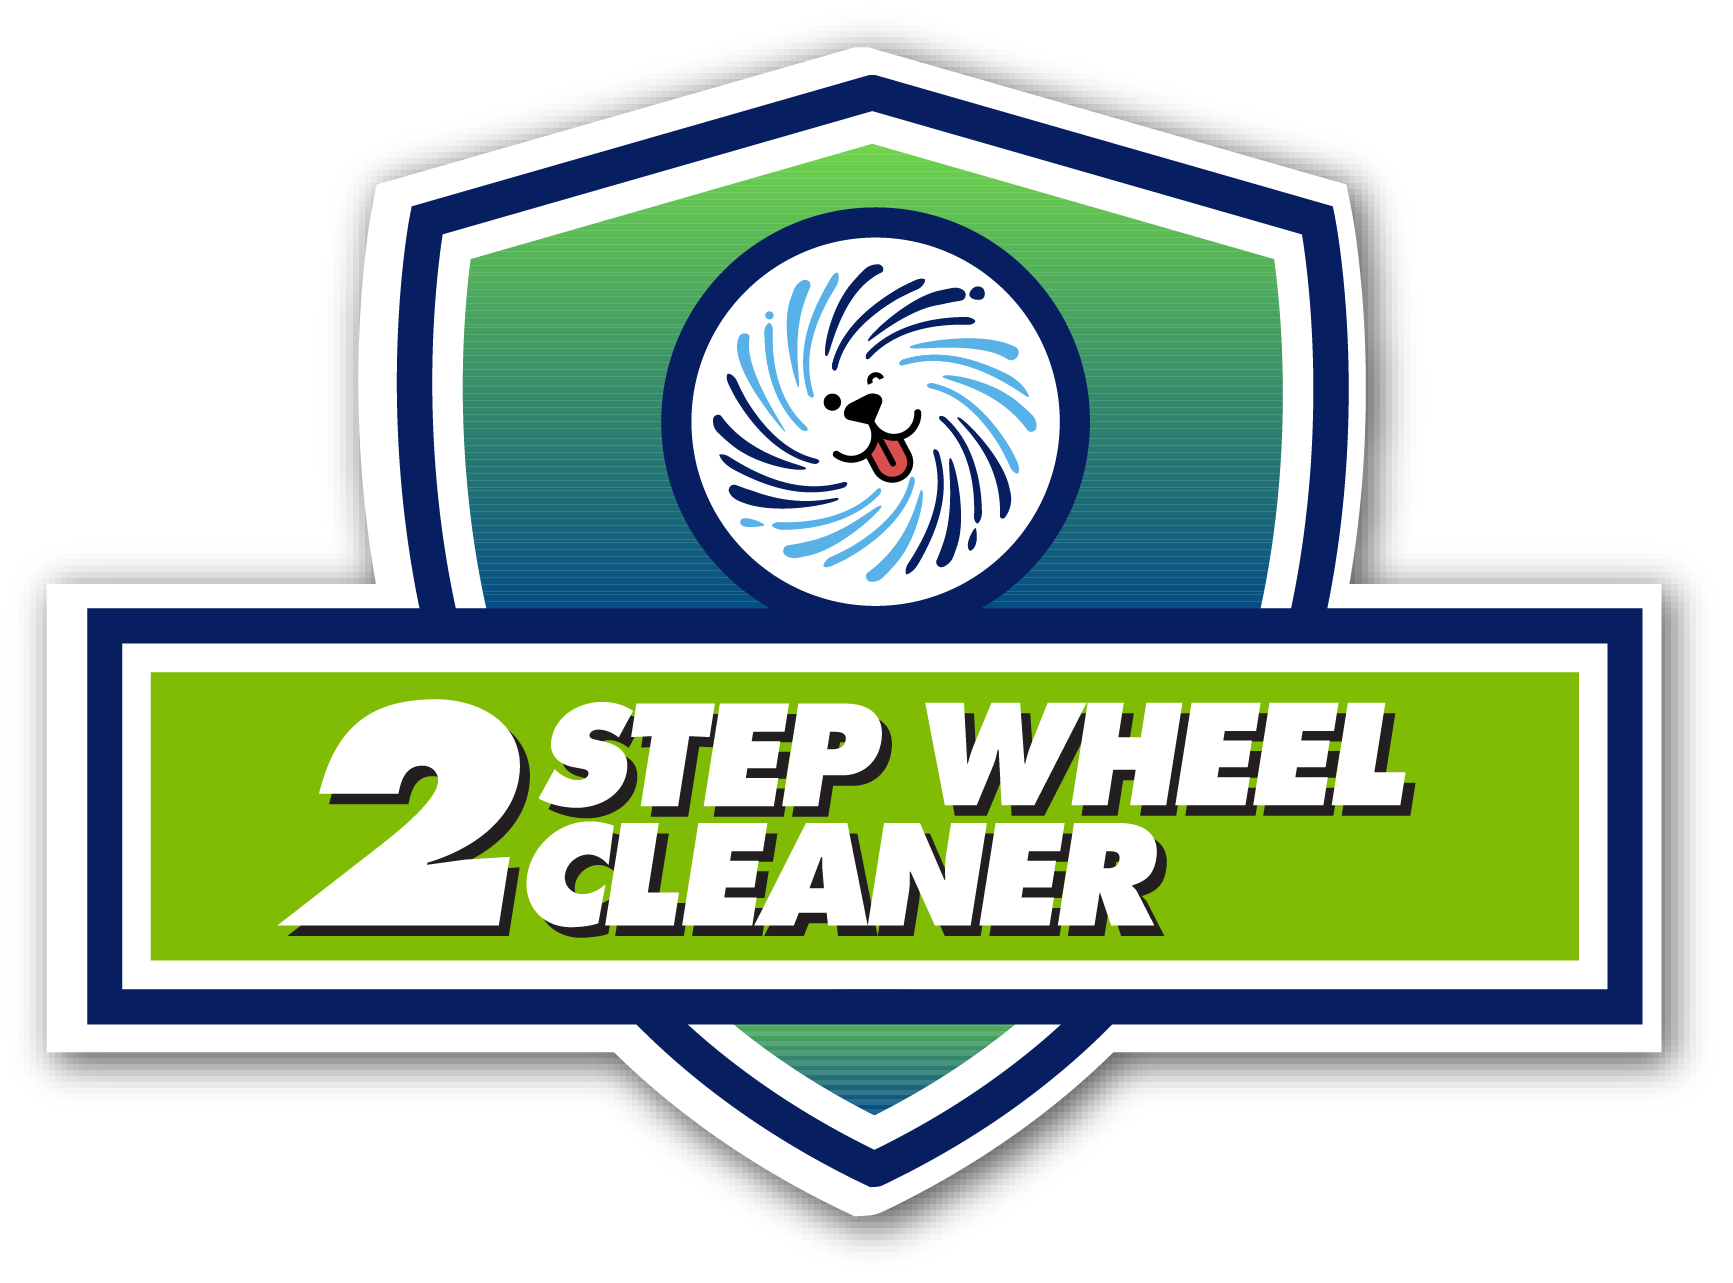 2 step wheel cleaner icon